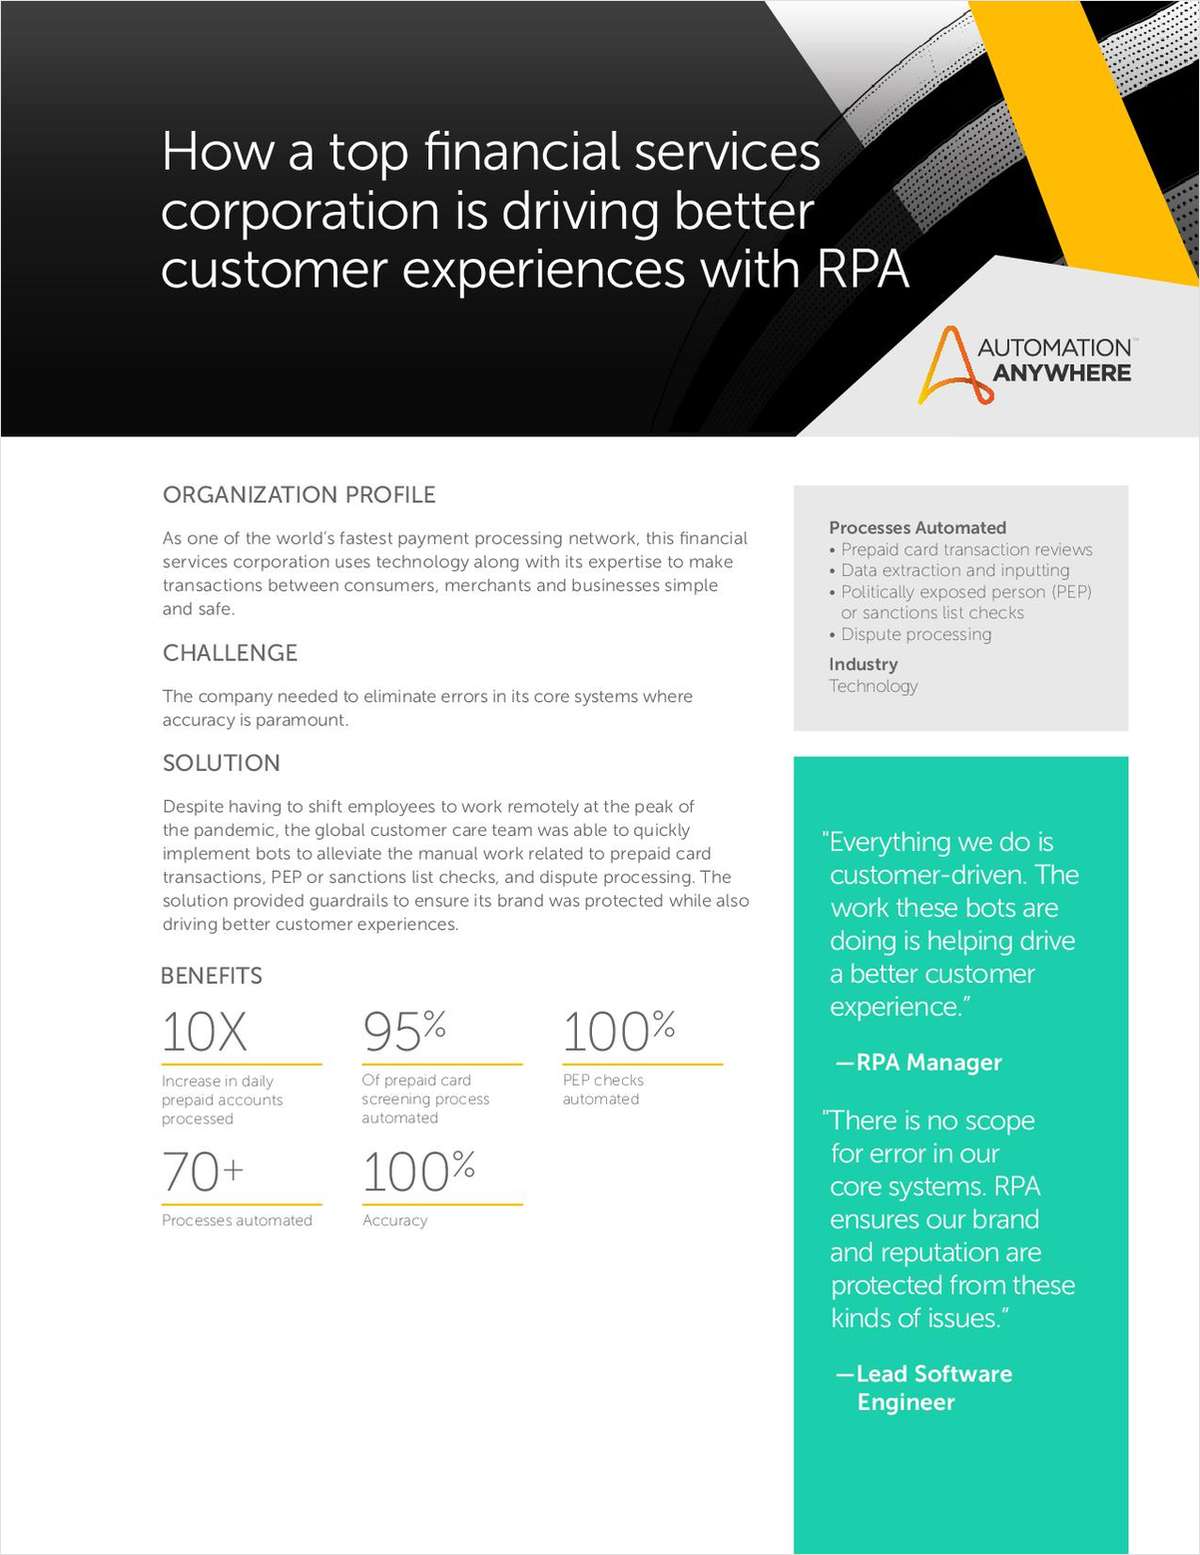 RPA improves customer experiences at a top financial services corporation